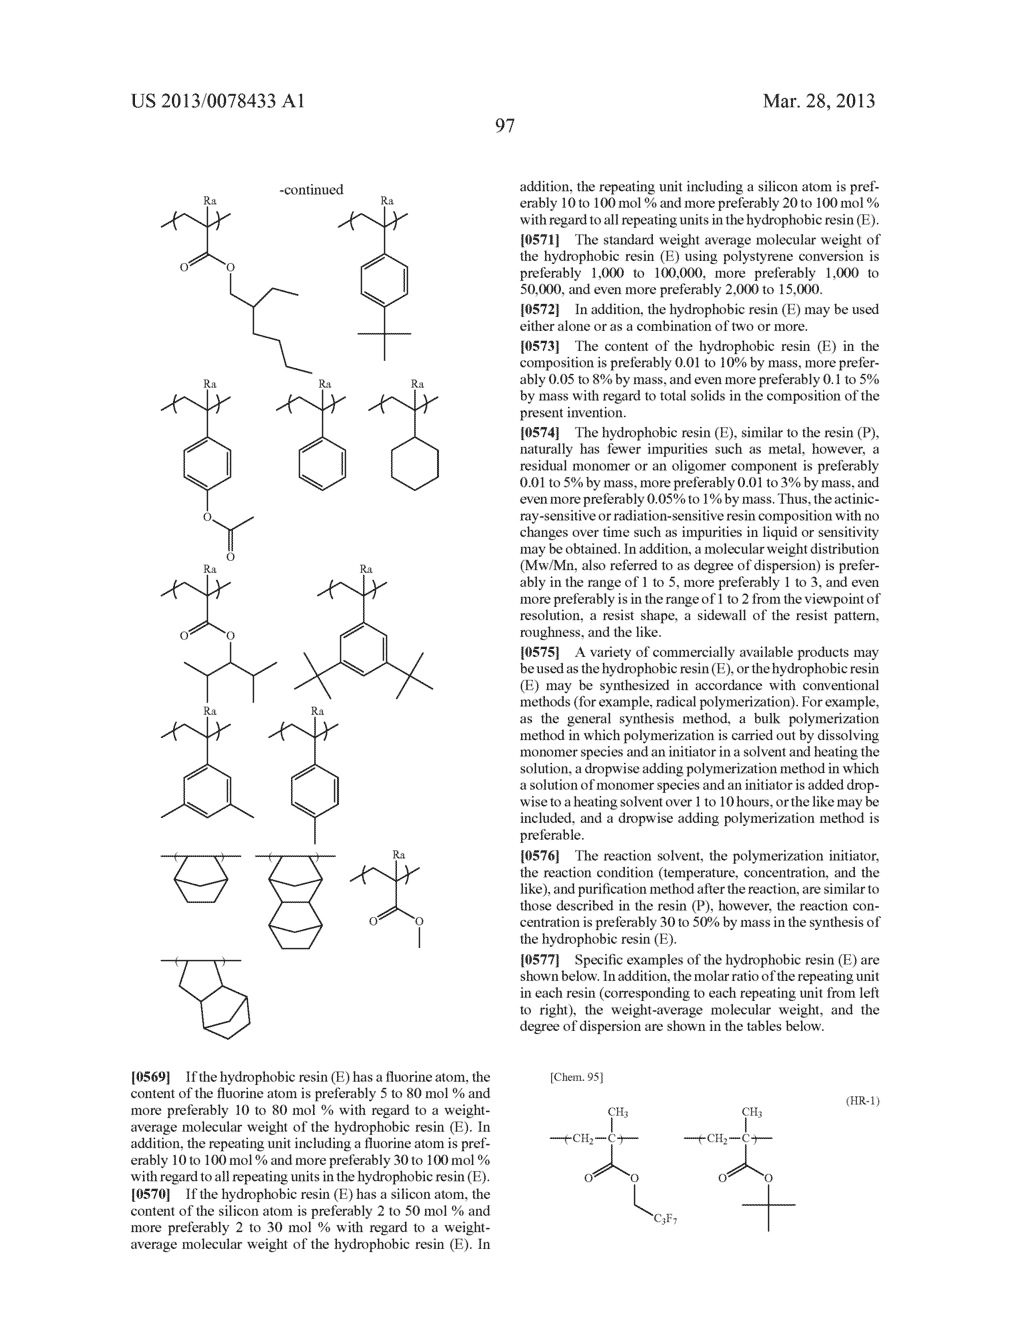 ACTINIC-RAY-SENSITIVE OR RADIATION-SENSITIVE RESIN COMPOSITION, AND RESIST     FILM USING THE SAME, PATTERN FORMING METHOD, ELECTRONIC DEVICE     MANUFACTURING METHOD, AND ELECTRONIC DEVICE, EACH USING THE SAME - diagram, schematic, and image 98